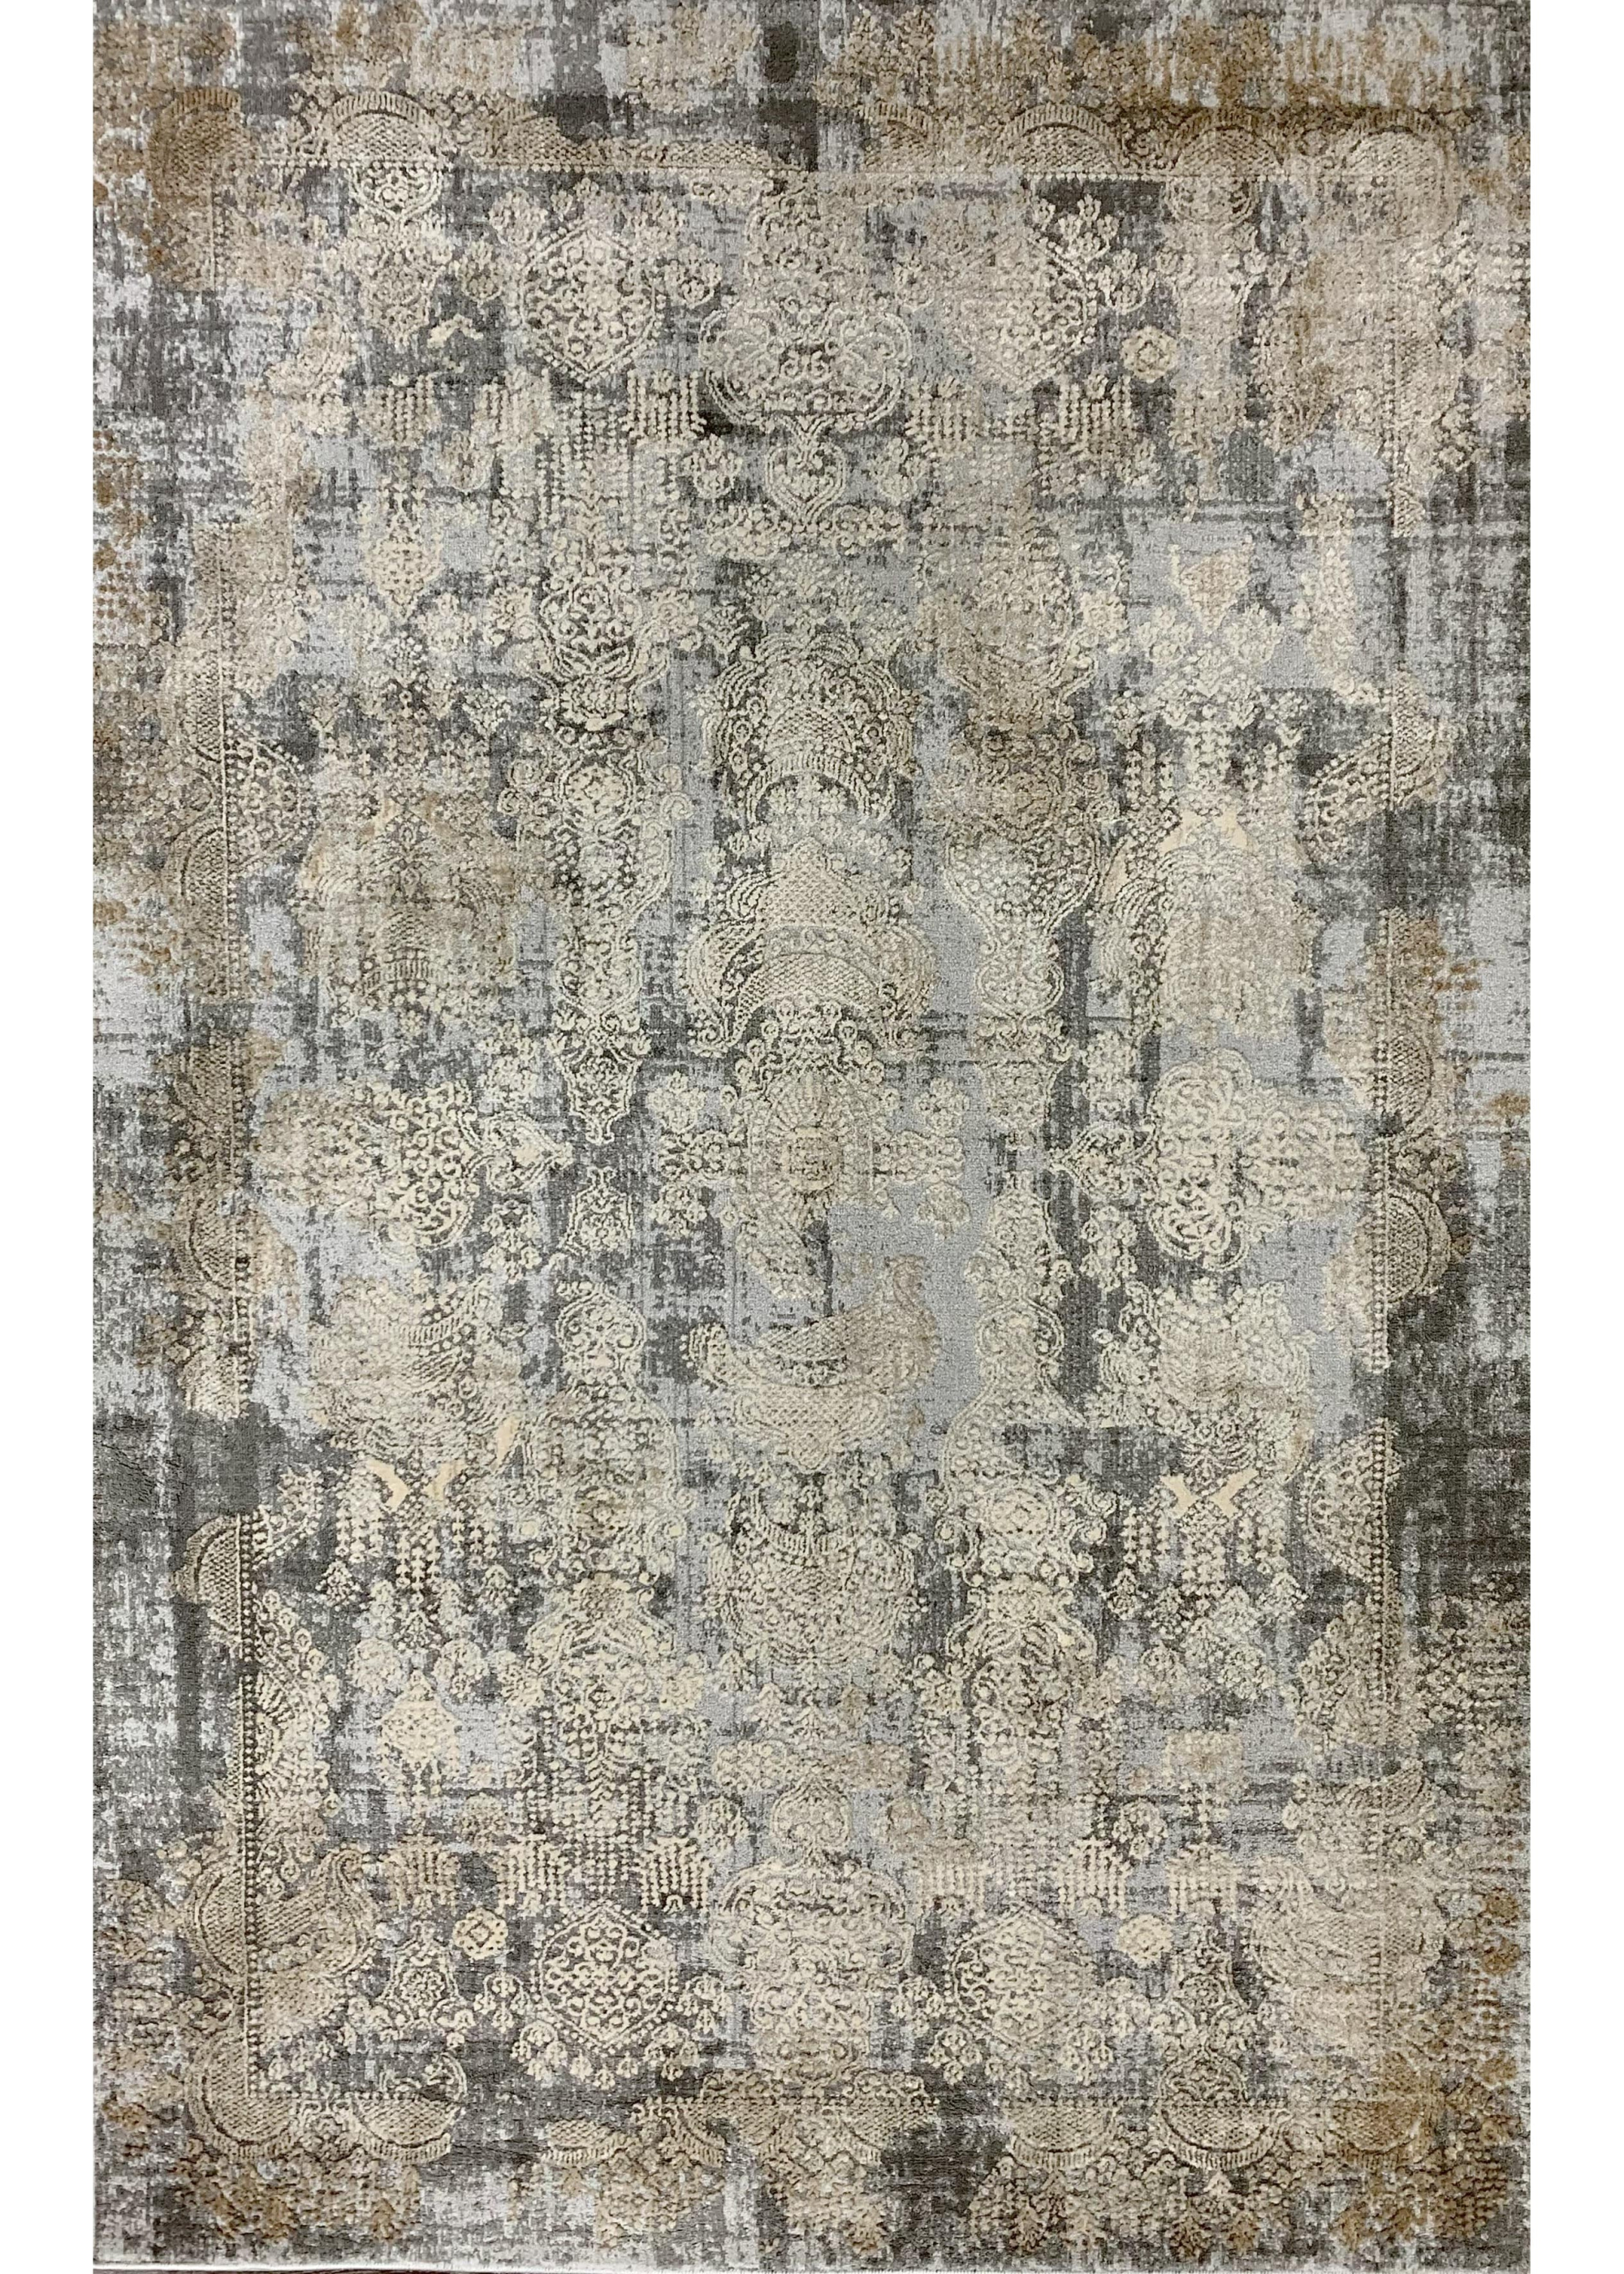 Monaco Woven Rug-Area rug for living room, dining area, and bedroom